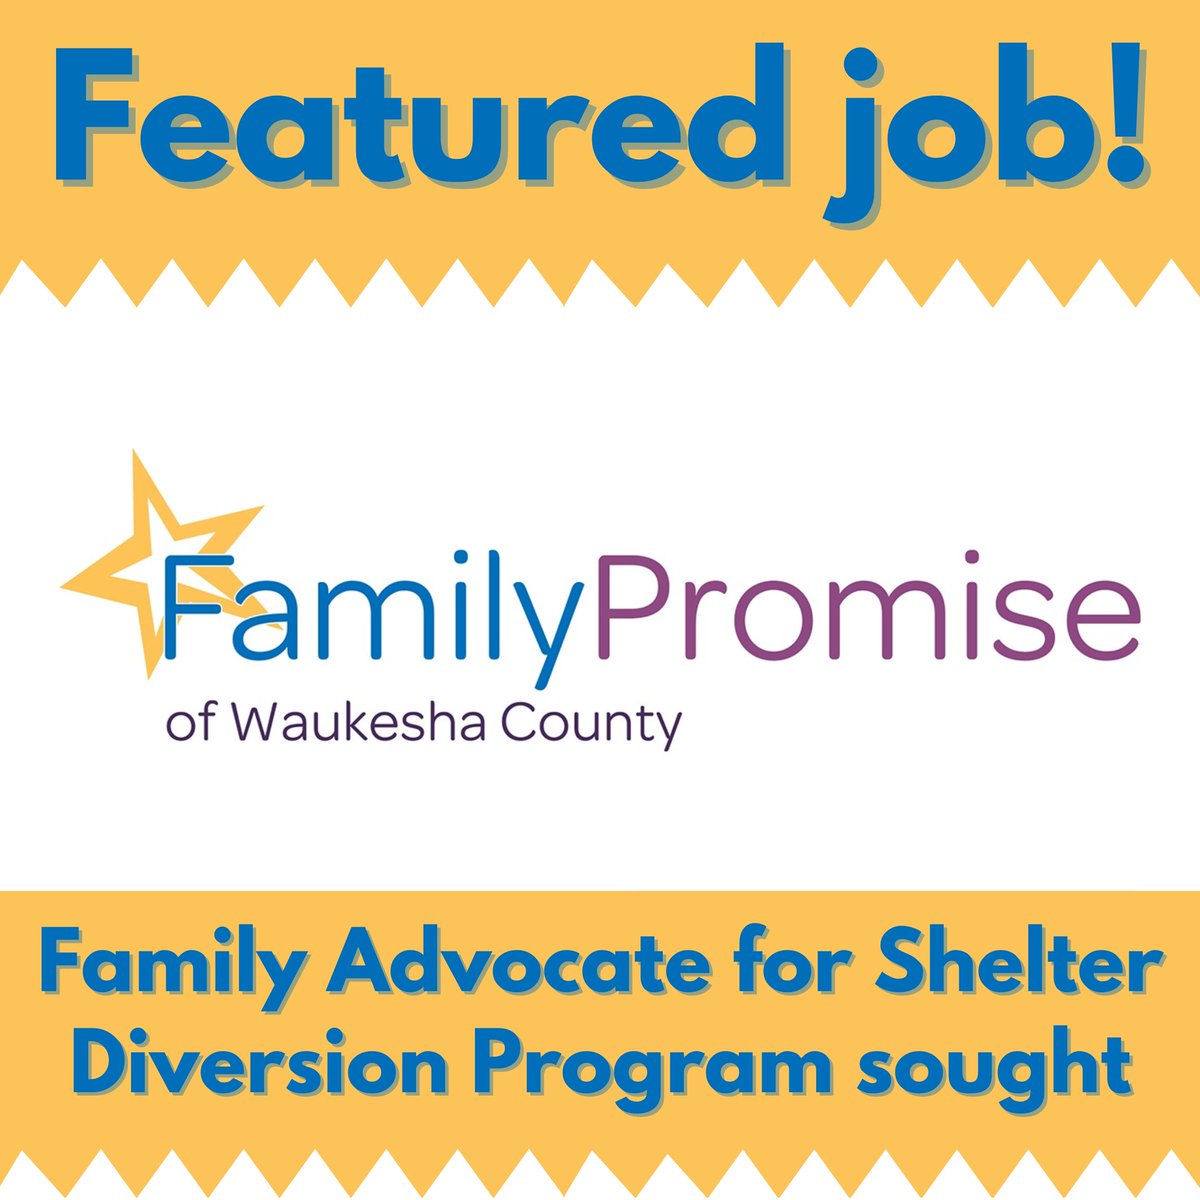 A Family Advocate (learn more or apply 👉 tinyurl.com/ynzfa7dx) is sought in #Waukesha by @FP_Waukesha. Competitive pay + benefits—apply today for this important #job opening!

#NonprofitJobs #WaukeshaWI #WaukeshaJobs #WaukeshaCounty #SocialWorkJobs #BSWjobs #HumanServicesJobs